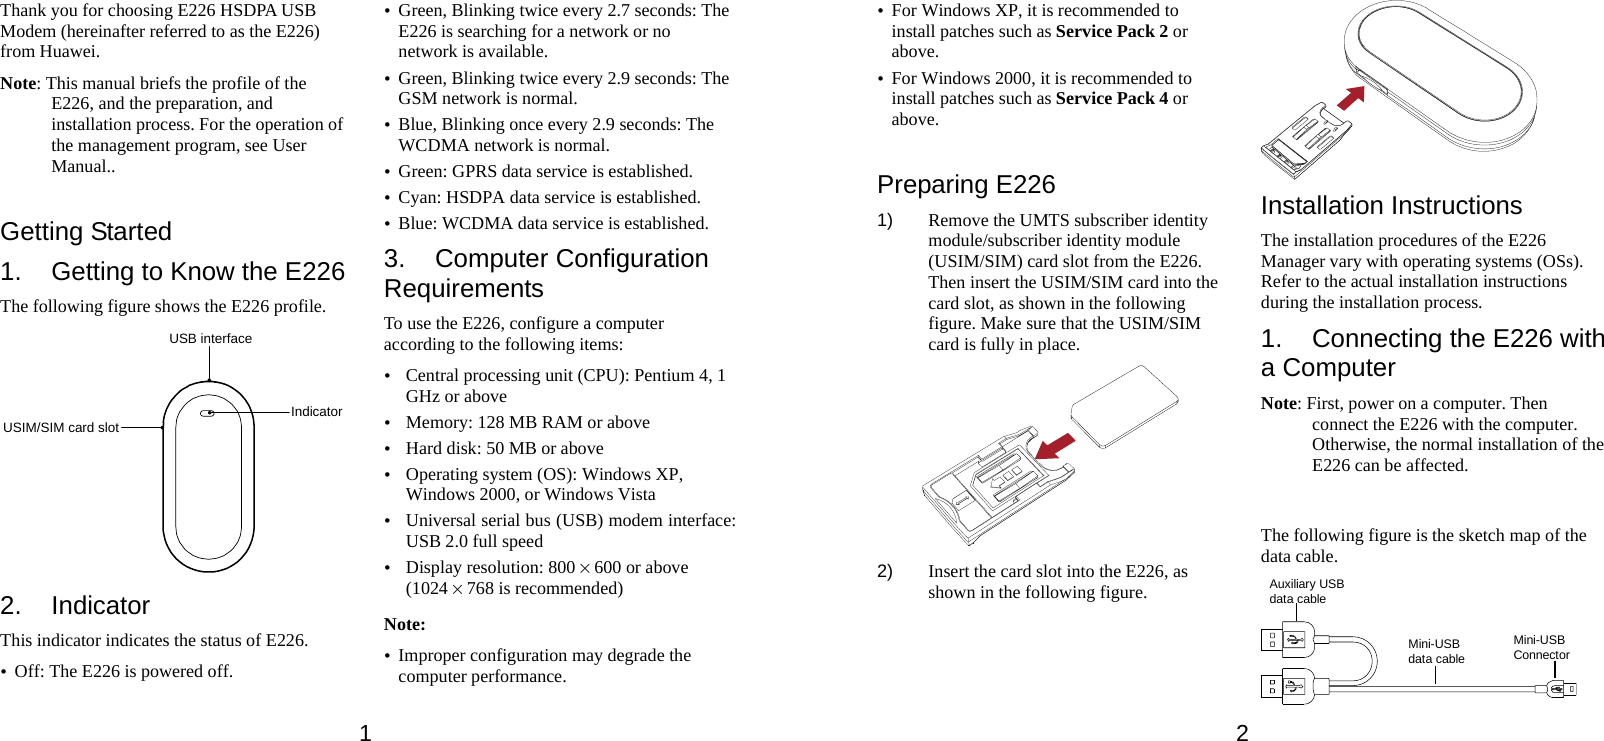 1 Thank you for choosing E226 HSDPA USB Modem (hereinafter referred to as the E226) from Huawei. Note: This manual briefs the profile of the E226, and the preparation, and installation process. For the operation of the management program, see User Manual..  Getting Started 1.  Getting to Know the E226 The following figure shows the E226 profile. USB interfaceUSIM/SIM card slot Indicator 2. Indicator This indicator indicates the status of E226. y Off: The E226 is powered off. y Green, Blinking twice every 2.7 seconds: The E226 is searching for a network or no network is available. y Green, Blinking twice every 2.9 seconds: The GSM network is normal. y Blue, Blinking once every 2.9 seconds: The WCDMA network is normal. y Green: GPRS data service is established. y Cyan: HSDPA data service is established. y Blue: WCDMA data service is established. 3. Computer Configuration Requirements To use the E226, configure a computer according to the following items: y Central processing unit (CPU): Pentium 4, 1 GHz or above y Memory: 128 MB RAM or above y Hard disk: 50 MB or above y Operating system (OS): Windows XP, Windows 2000, or Windows Vista y Universal serial bus (USB) modem interface: USB 2.0 full speed y Display resolution: 800 % 600 or above (1024 % 768 is recommended) Note: y Improper configuration may degrade the computer performance.   2 y For Windows XP, it is recommended to install patches such as Service Pack 2 or above. y For Windows 2000, it is recommended to install patches such as Service Pack 4 or above.  Preparing E226 1)  Remove the UMTS subscriber identity module/subscriber identity module (USIM/SIM) card slot from the E226. Then insert the USIM/SIM card into the card slot, as shown in the following figure. Make sure that the USIM/SIM card is fully in place.  2)  Insert the card slot into the E226, as shown in the following figure.  Installation Instructions The installation procedures of the E226 Manager vary with operating systems (OSs). Refer to the actual installation instructions during the installation process. 1.  Connecting the E226 with a Computer Note: First, power on a computer. Then connect the E226 with the computer. Otherwise, the normal installation of the E226 can be affected.  The following figure is the sketch map of the data cable. Auxiliary USBdata cableMini-USBConnectorMini-USBdata cable 